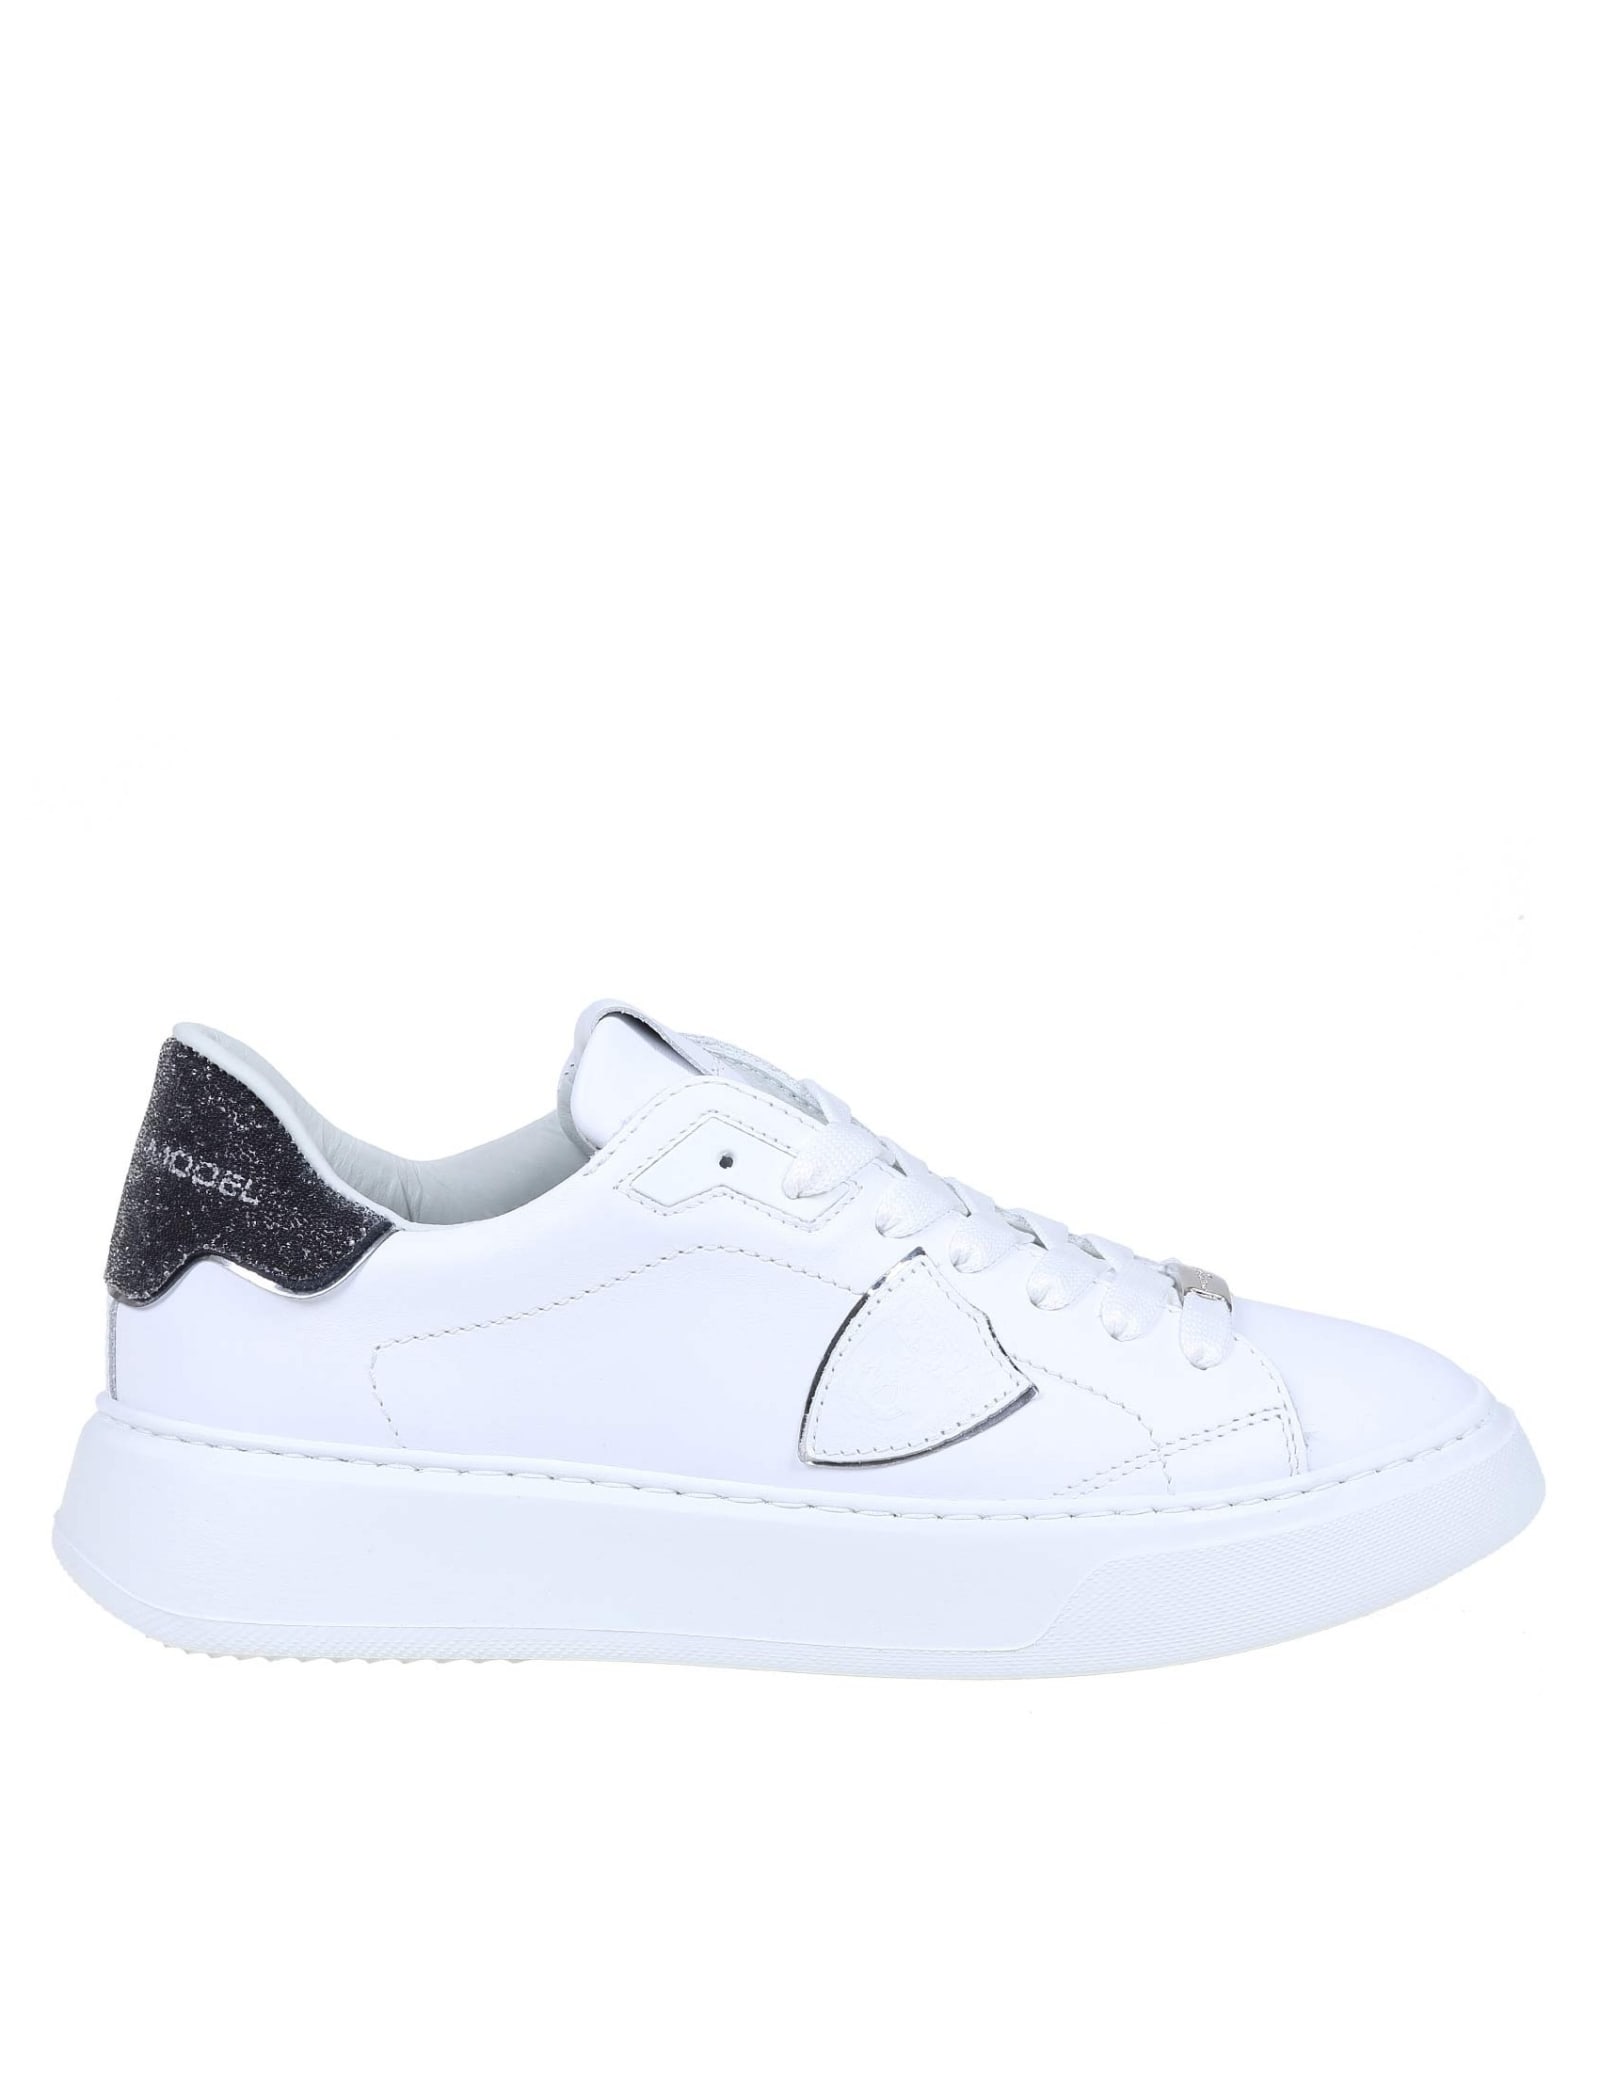 Philippe Model Temple In White Leather With Black Glitter